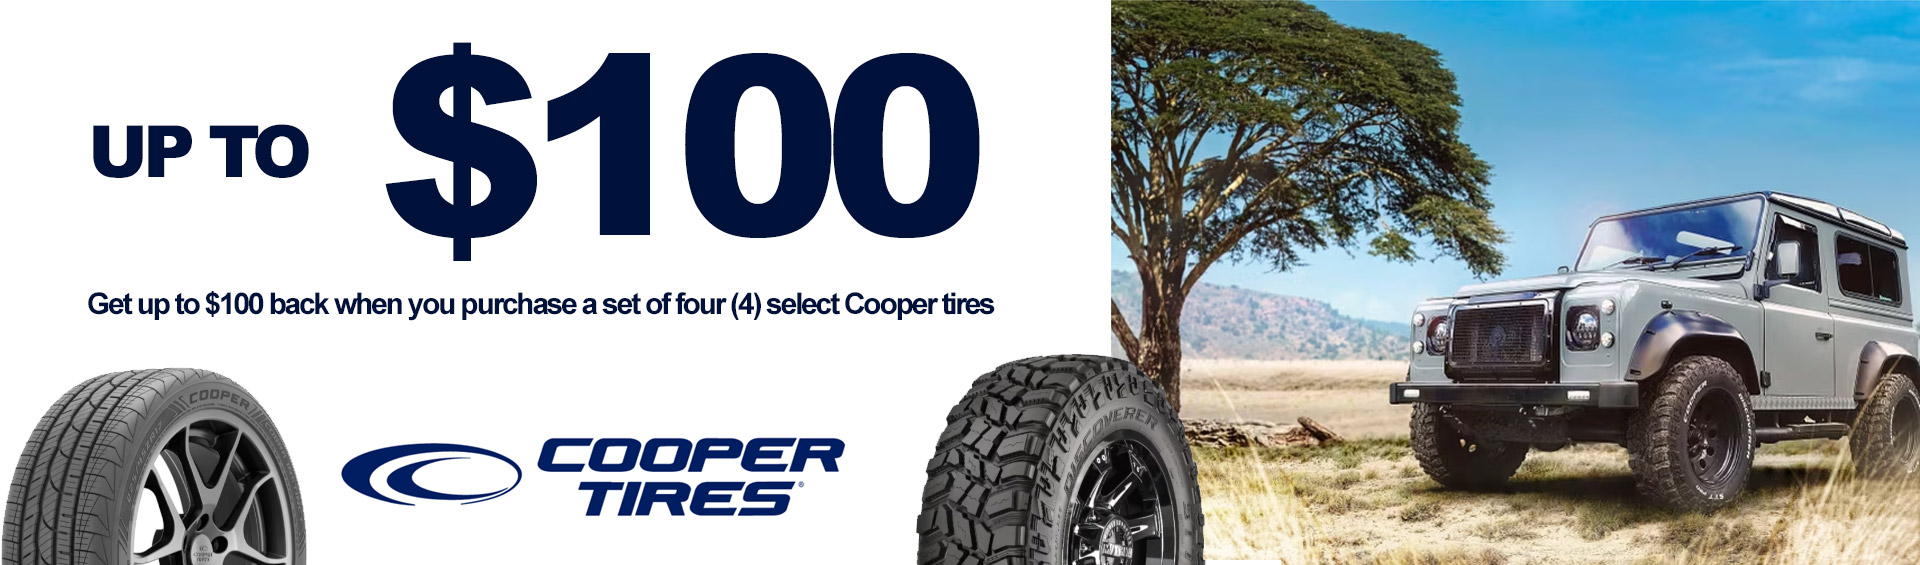 Up To $100 Rebates on Select Cooper Tires